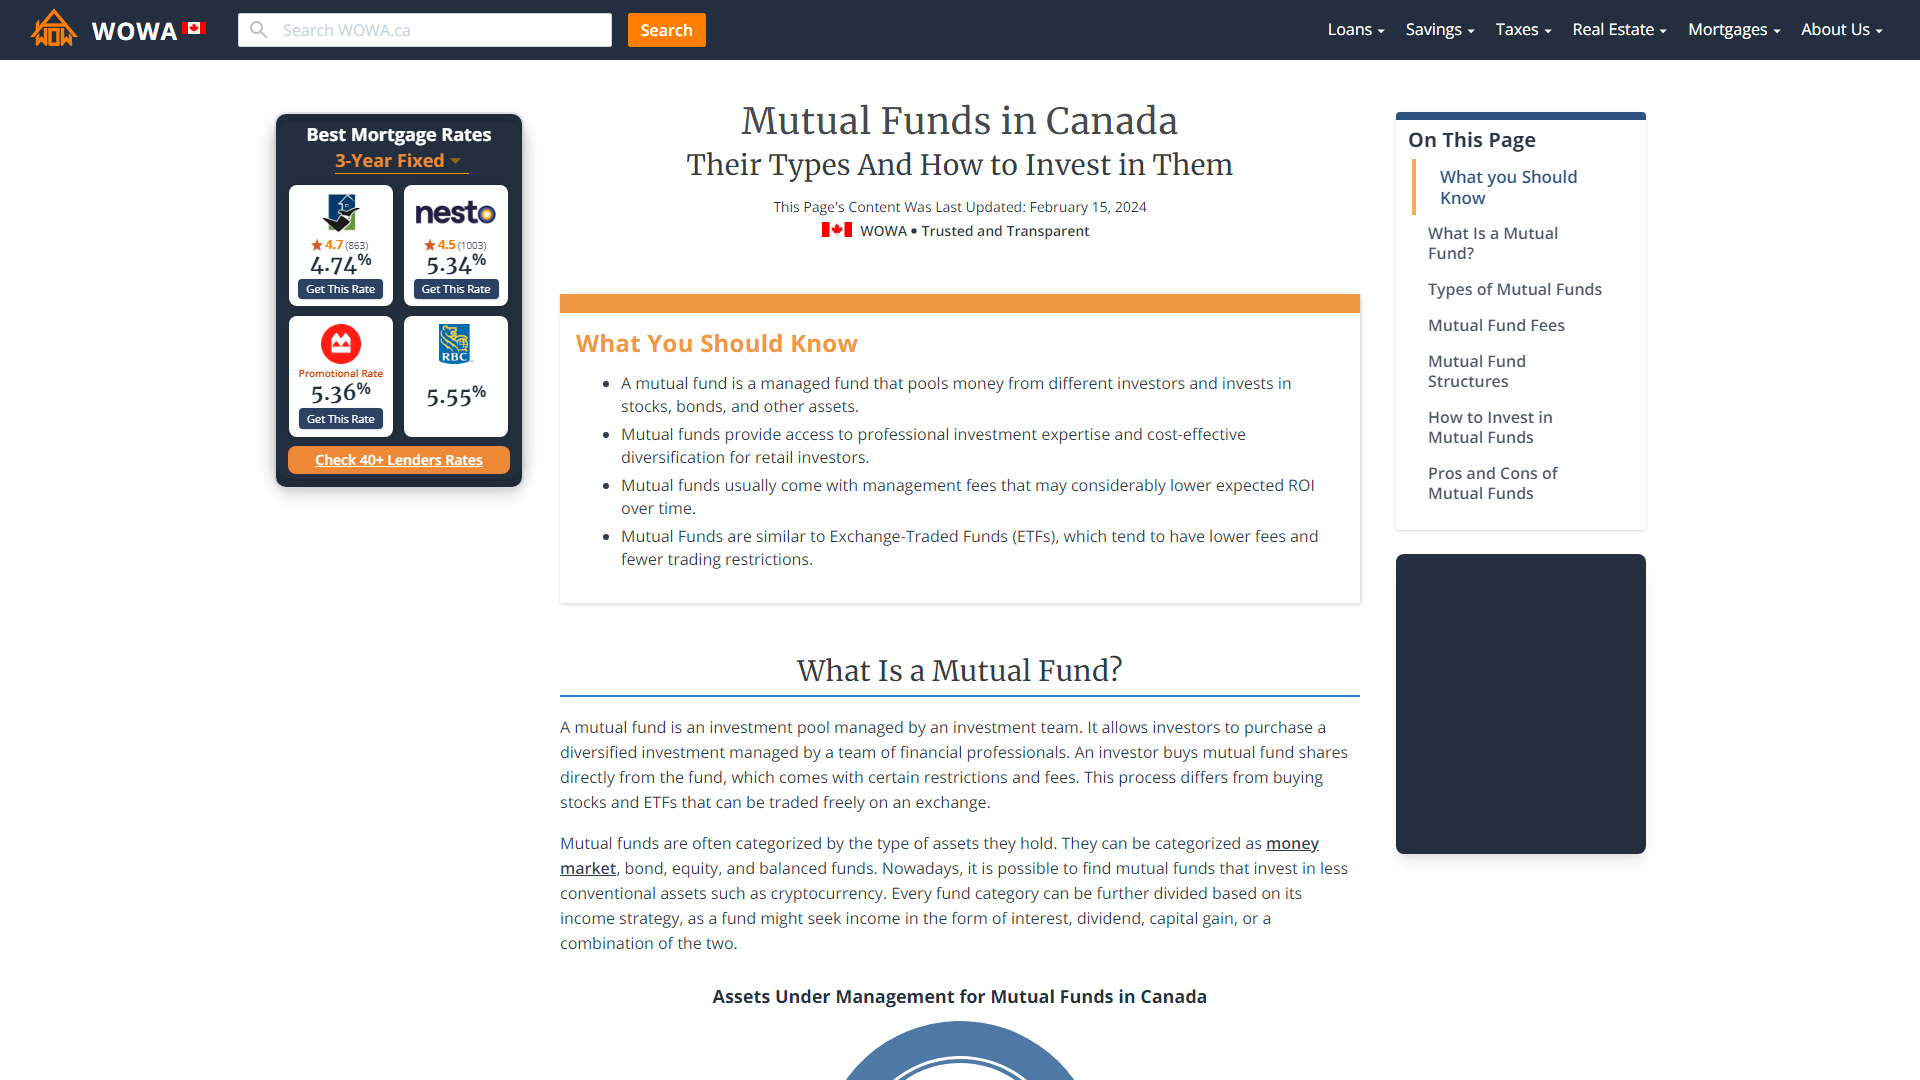 Mutual Funds in Canada Types and How to Invest WOWA.ca